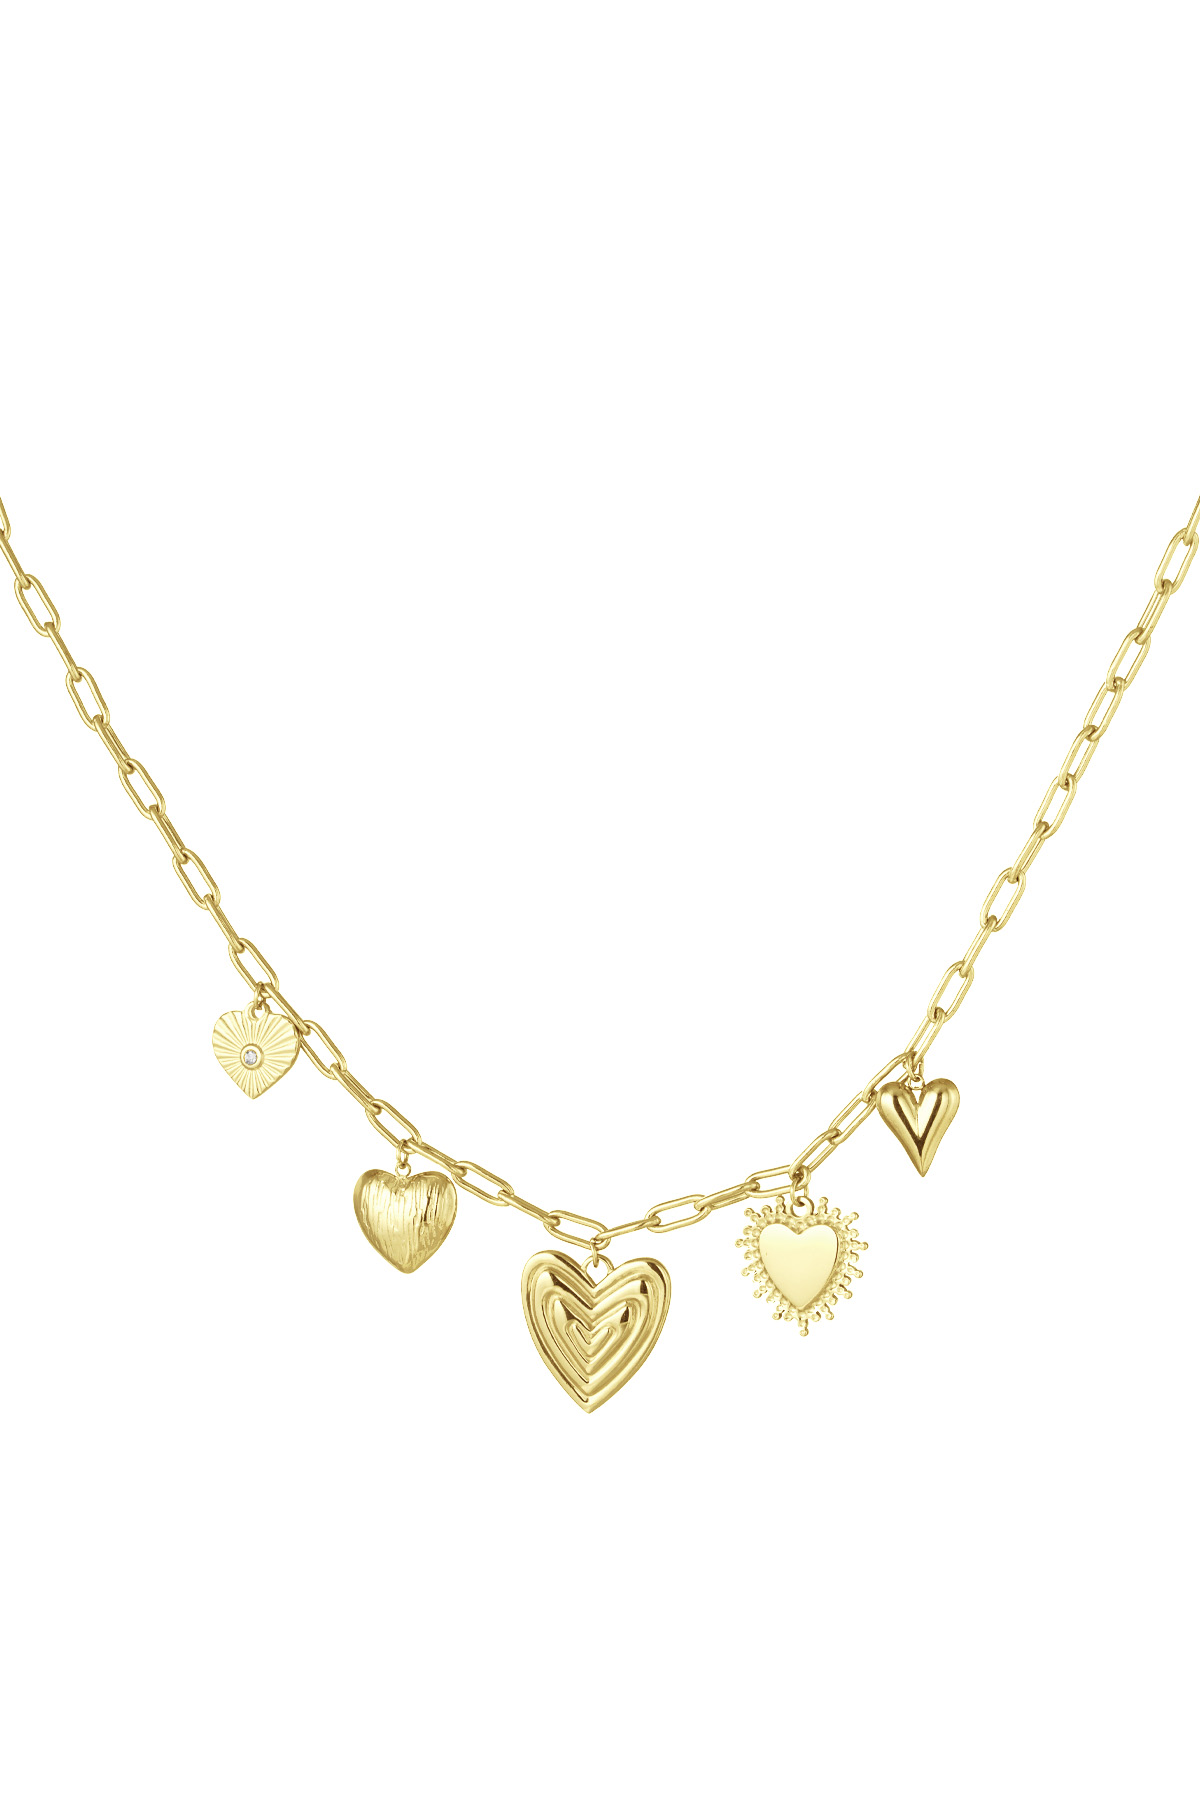 Charm necklace hearts for the win - gold